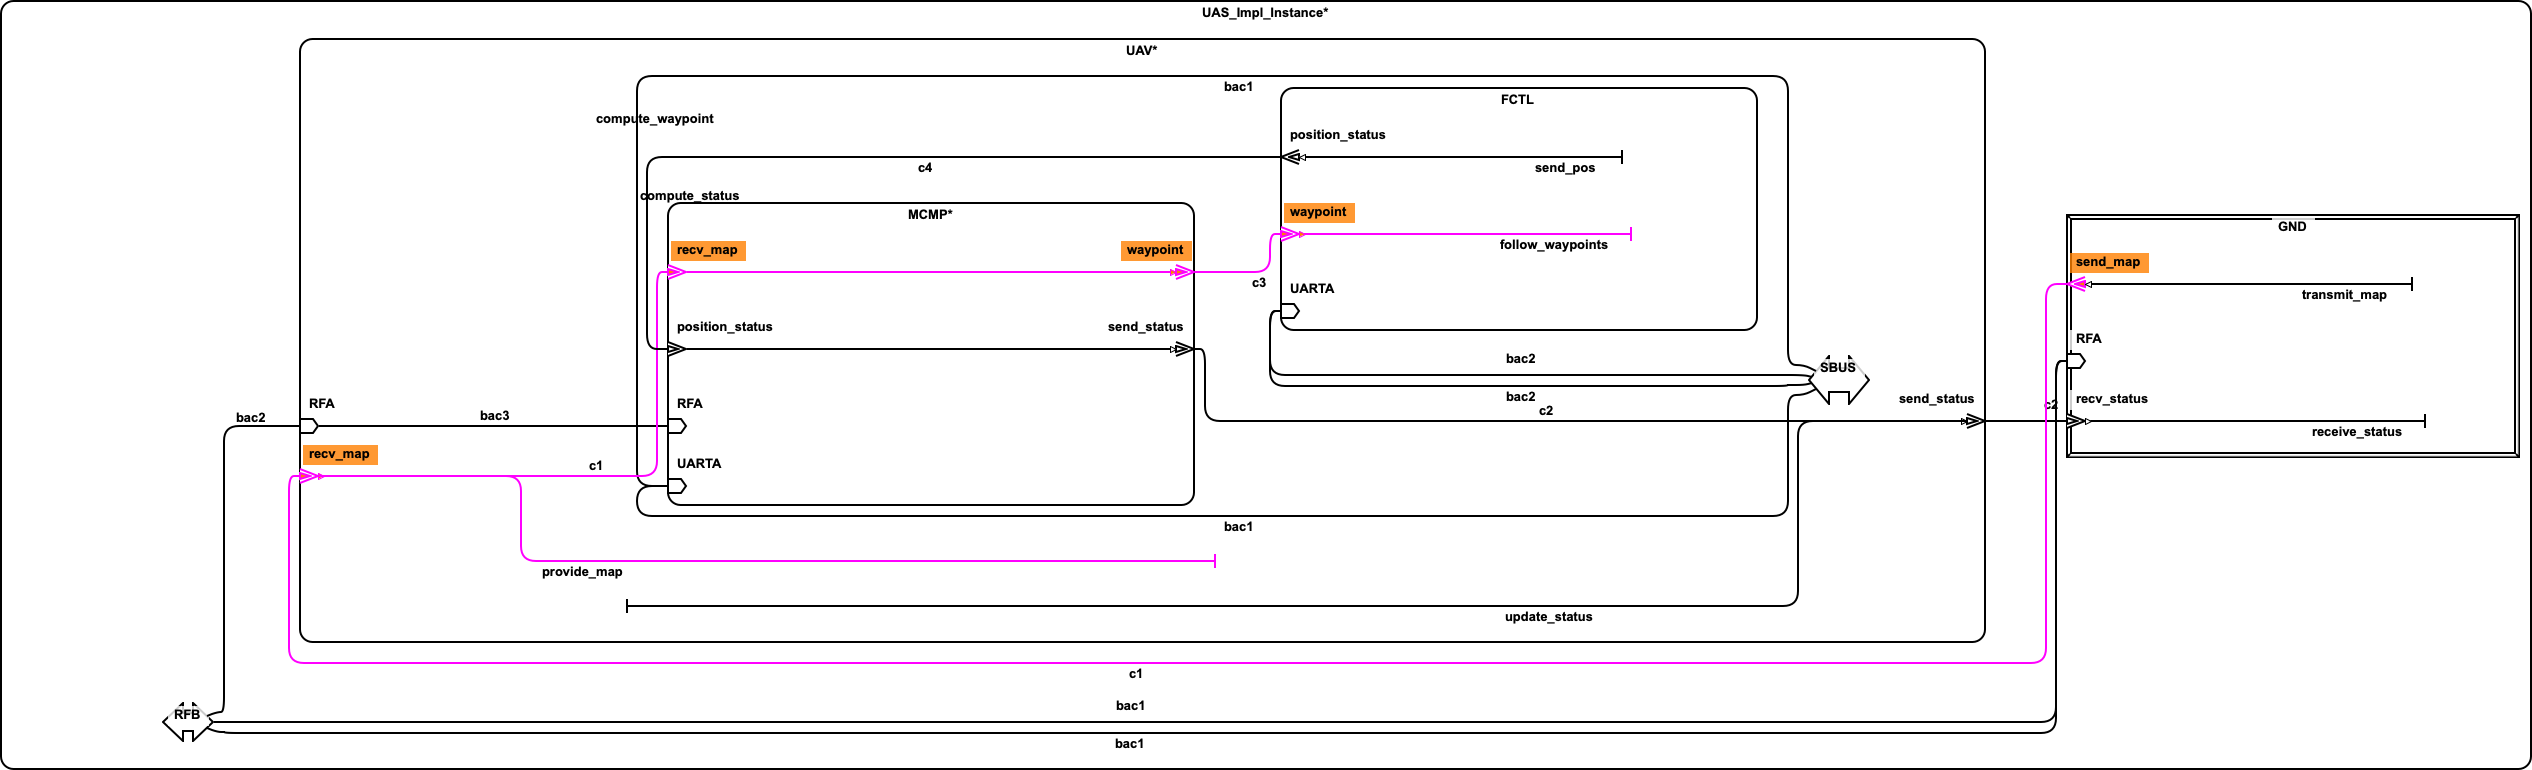 Awas result on expanded AADL instance diagram